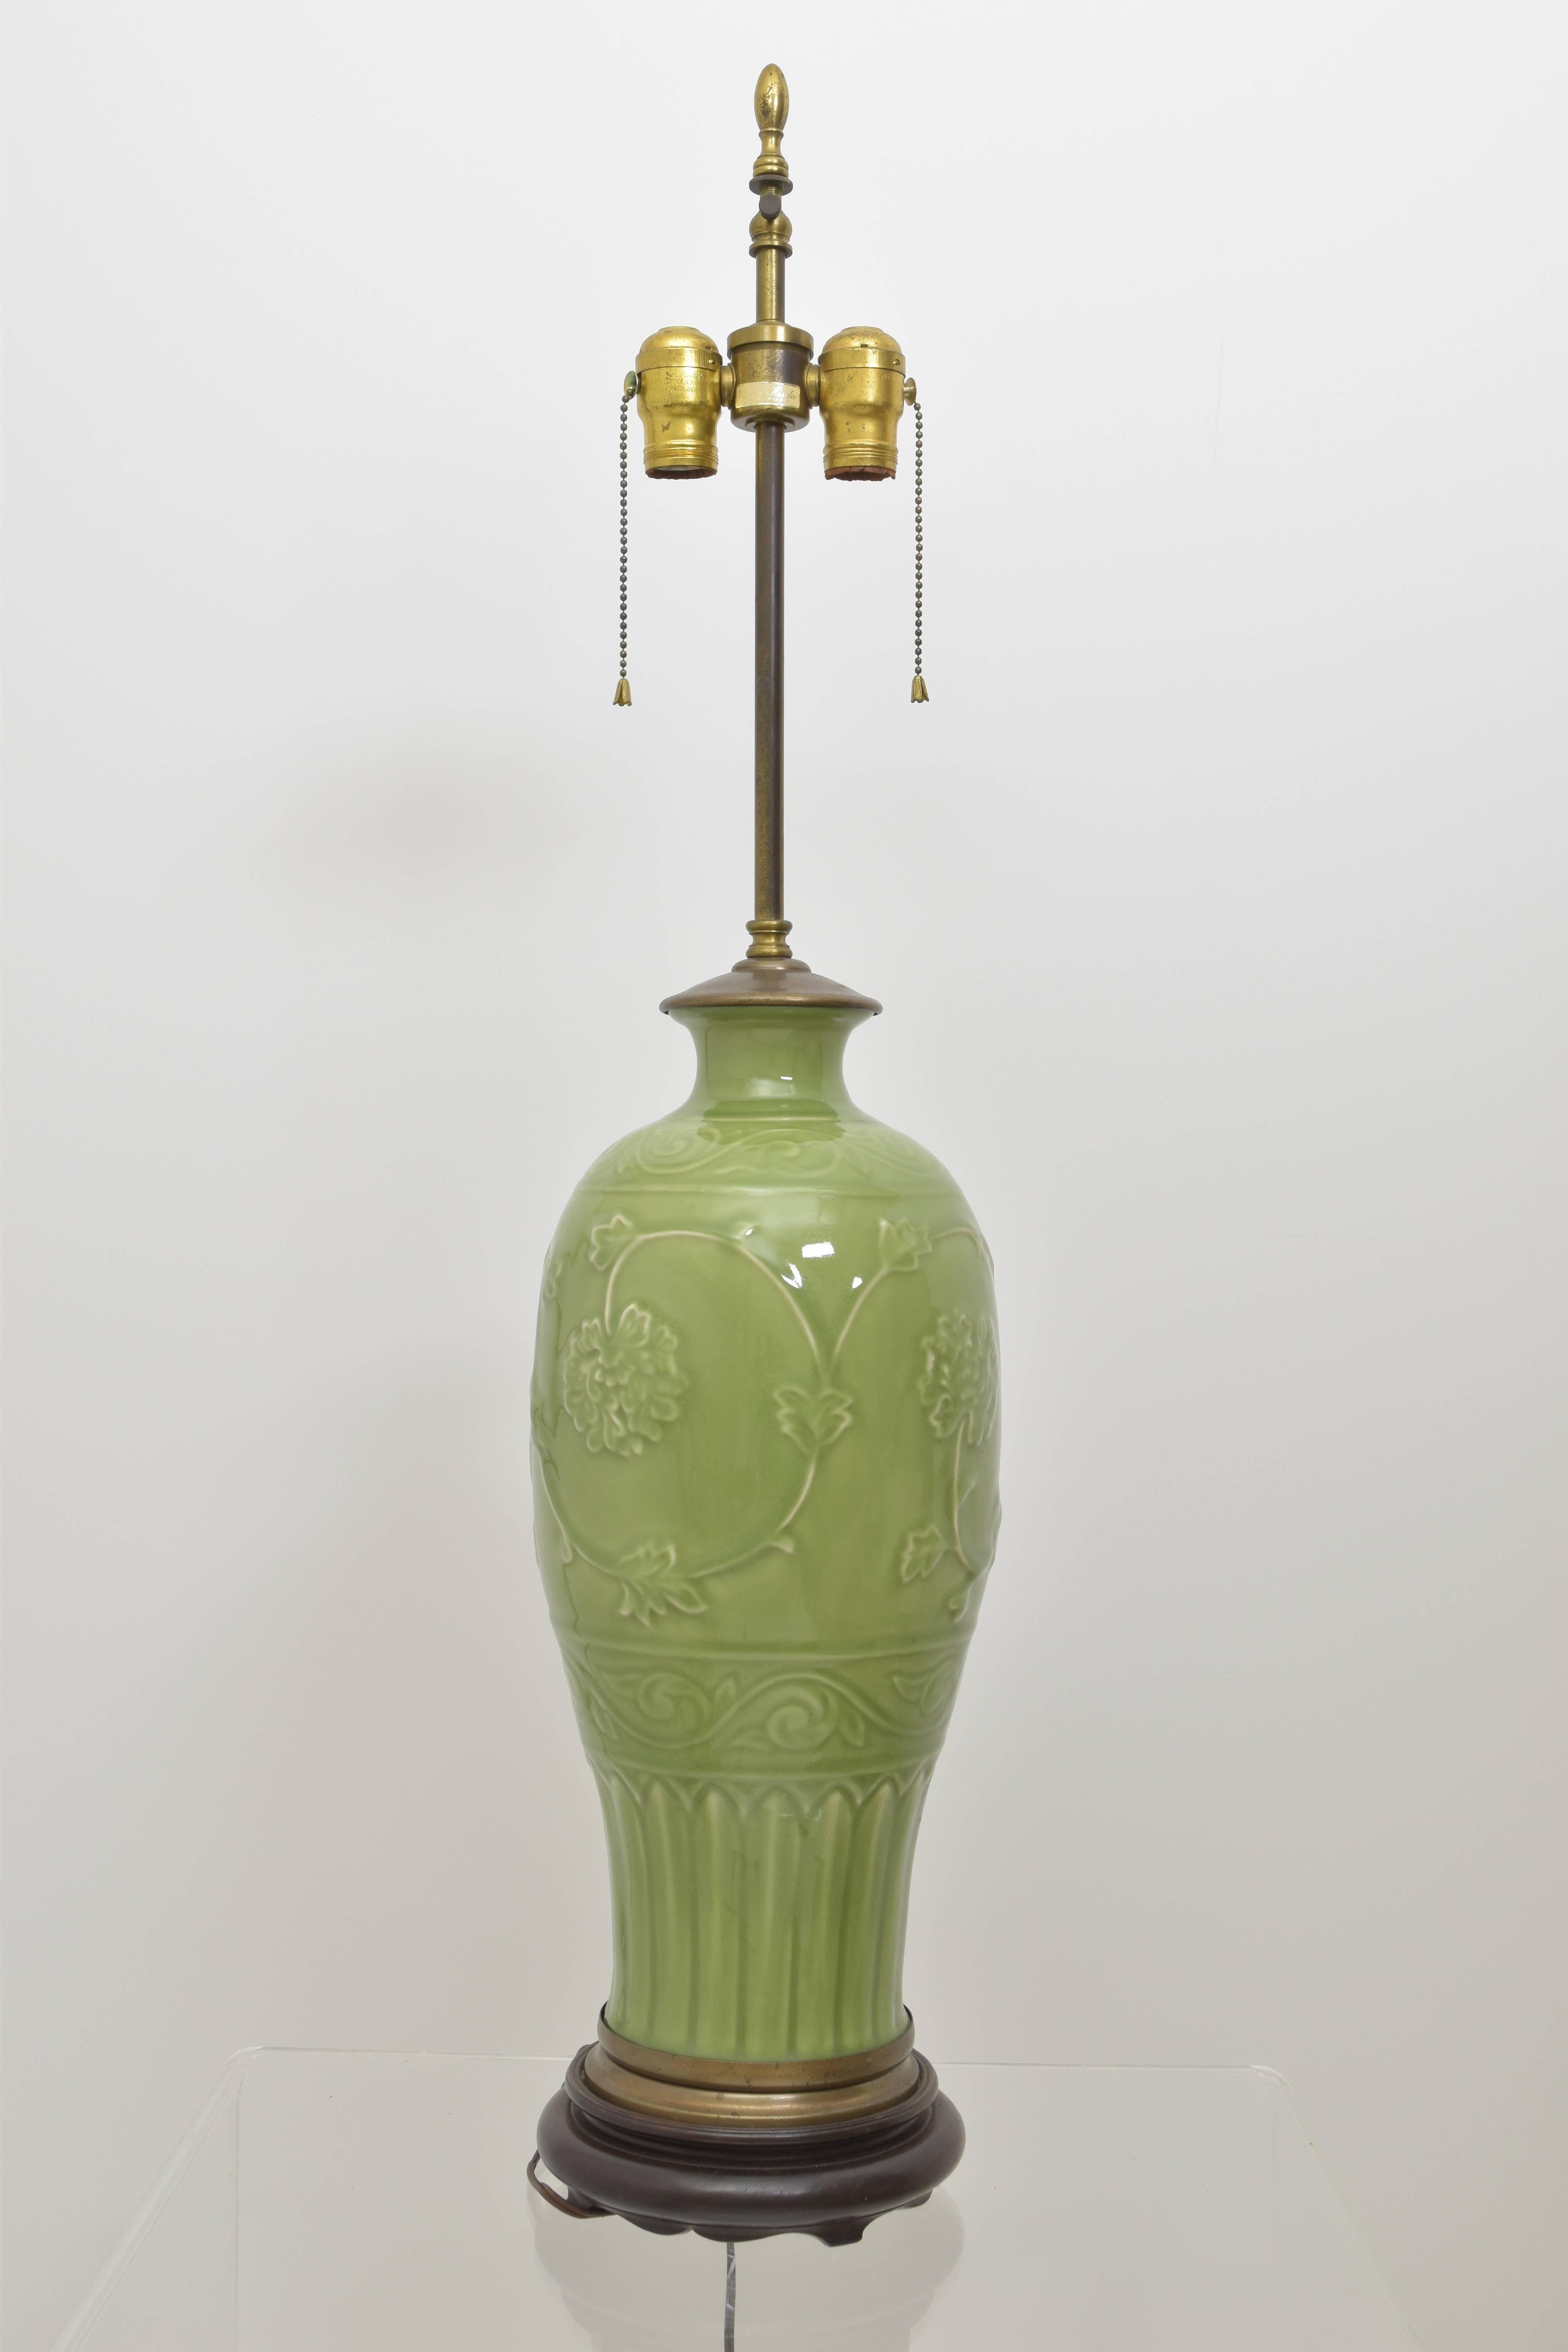 Slender celadon vase mounted on a wooden base with brass accent. Chrysanthemum detail throughout in a beautiful celadon green.